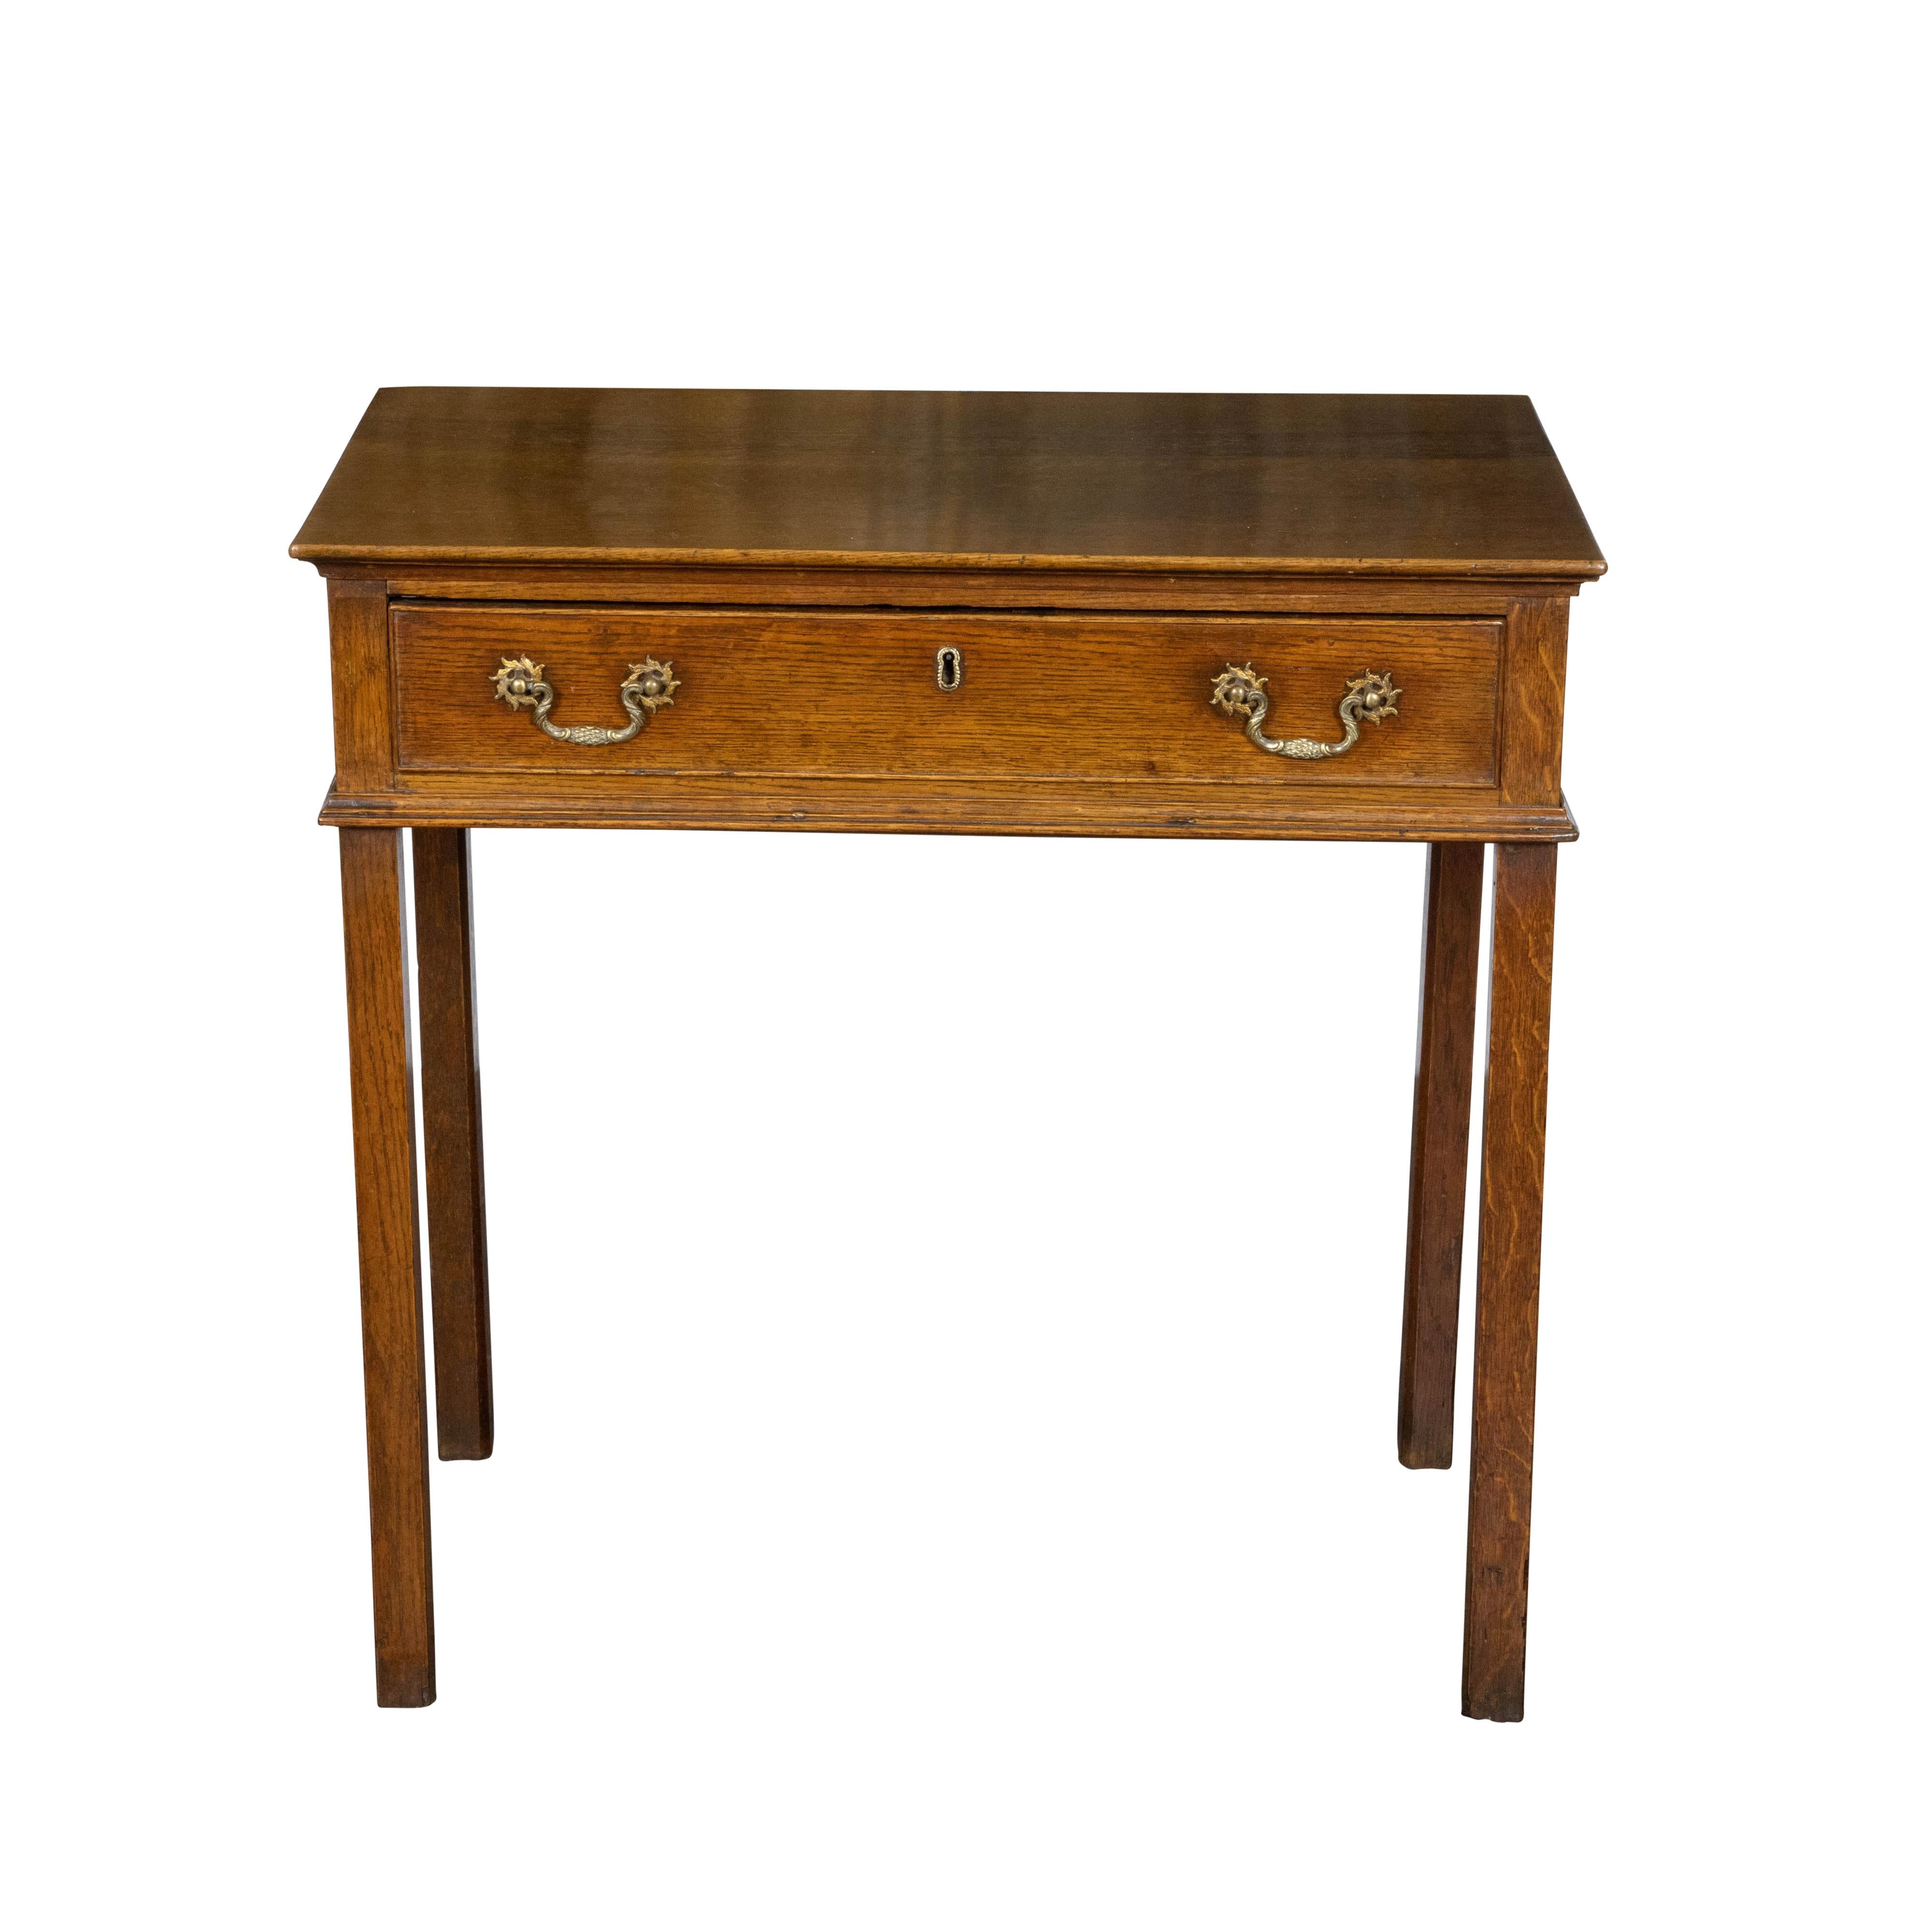 An English oak side table from the Mid-19th Century, with single drawer, brass hardware and straight legs. Created in England during the second quarter of the 19th Century, this oak side table features a rectangular top sitting above a single